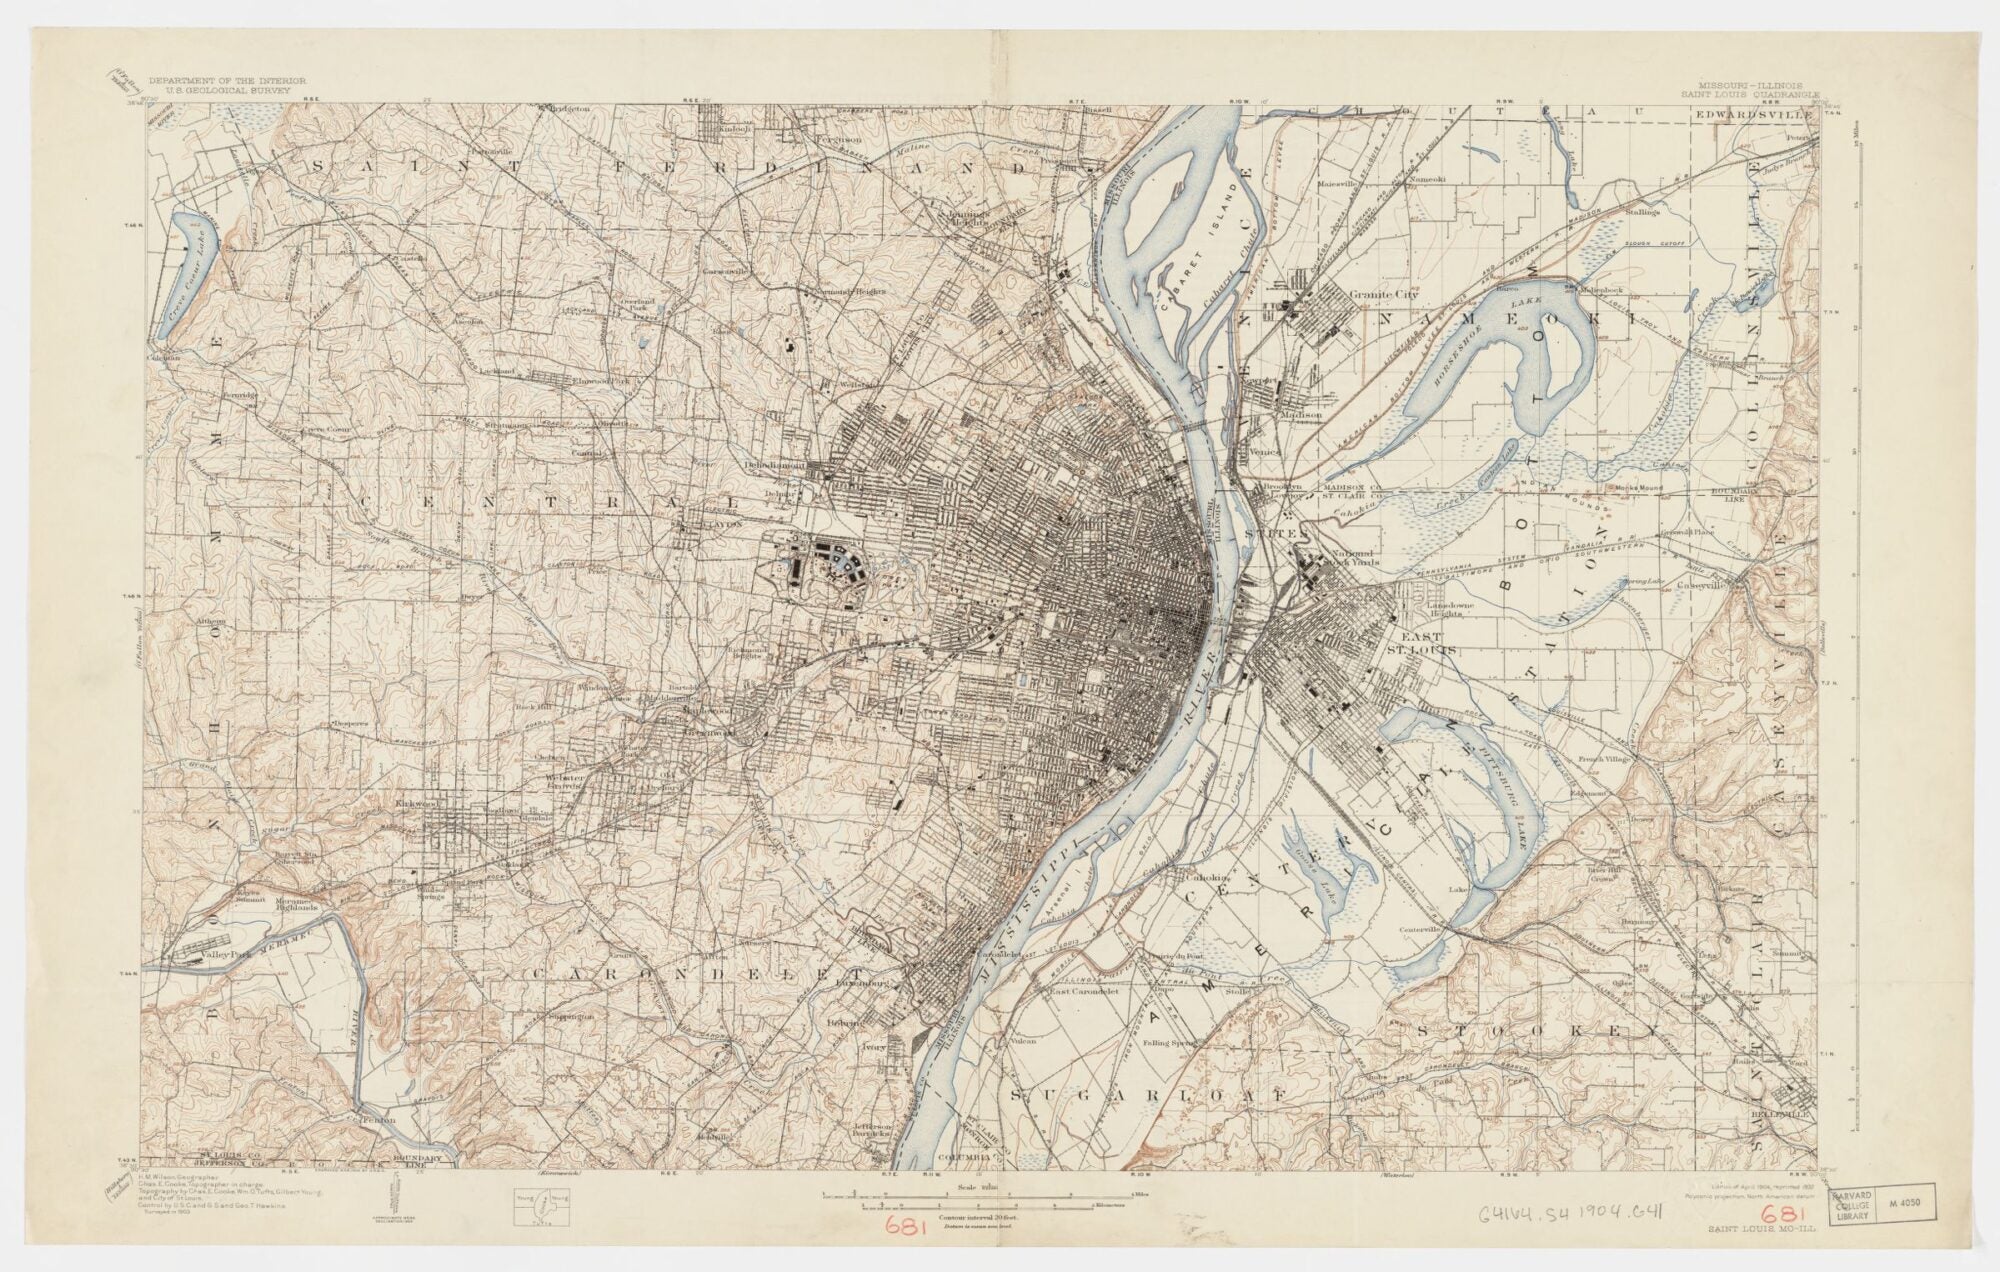 An old map of St. Louis